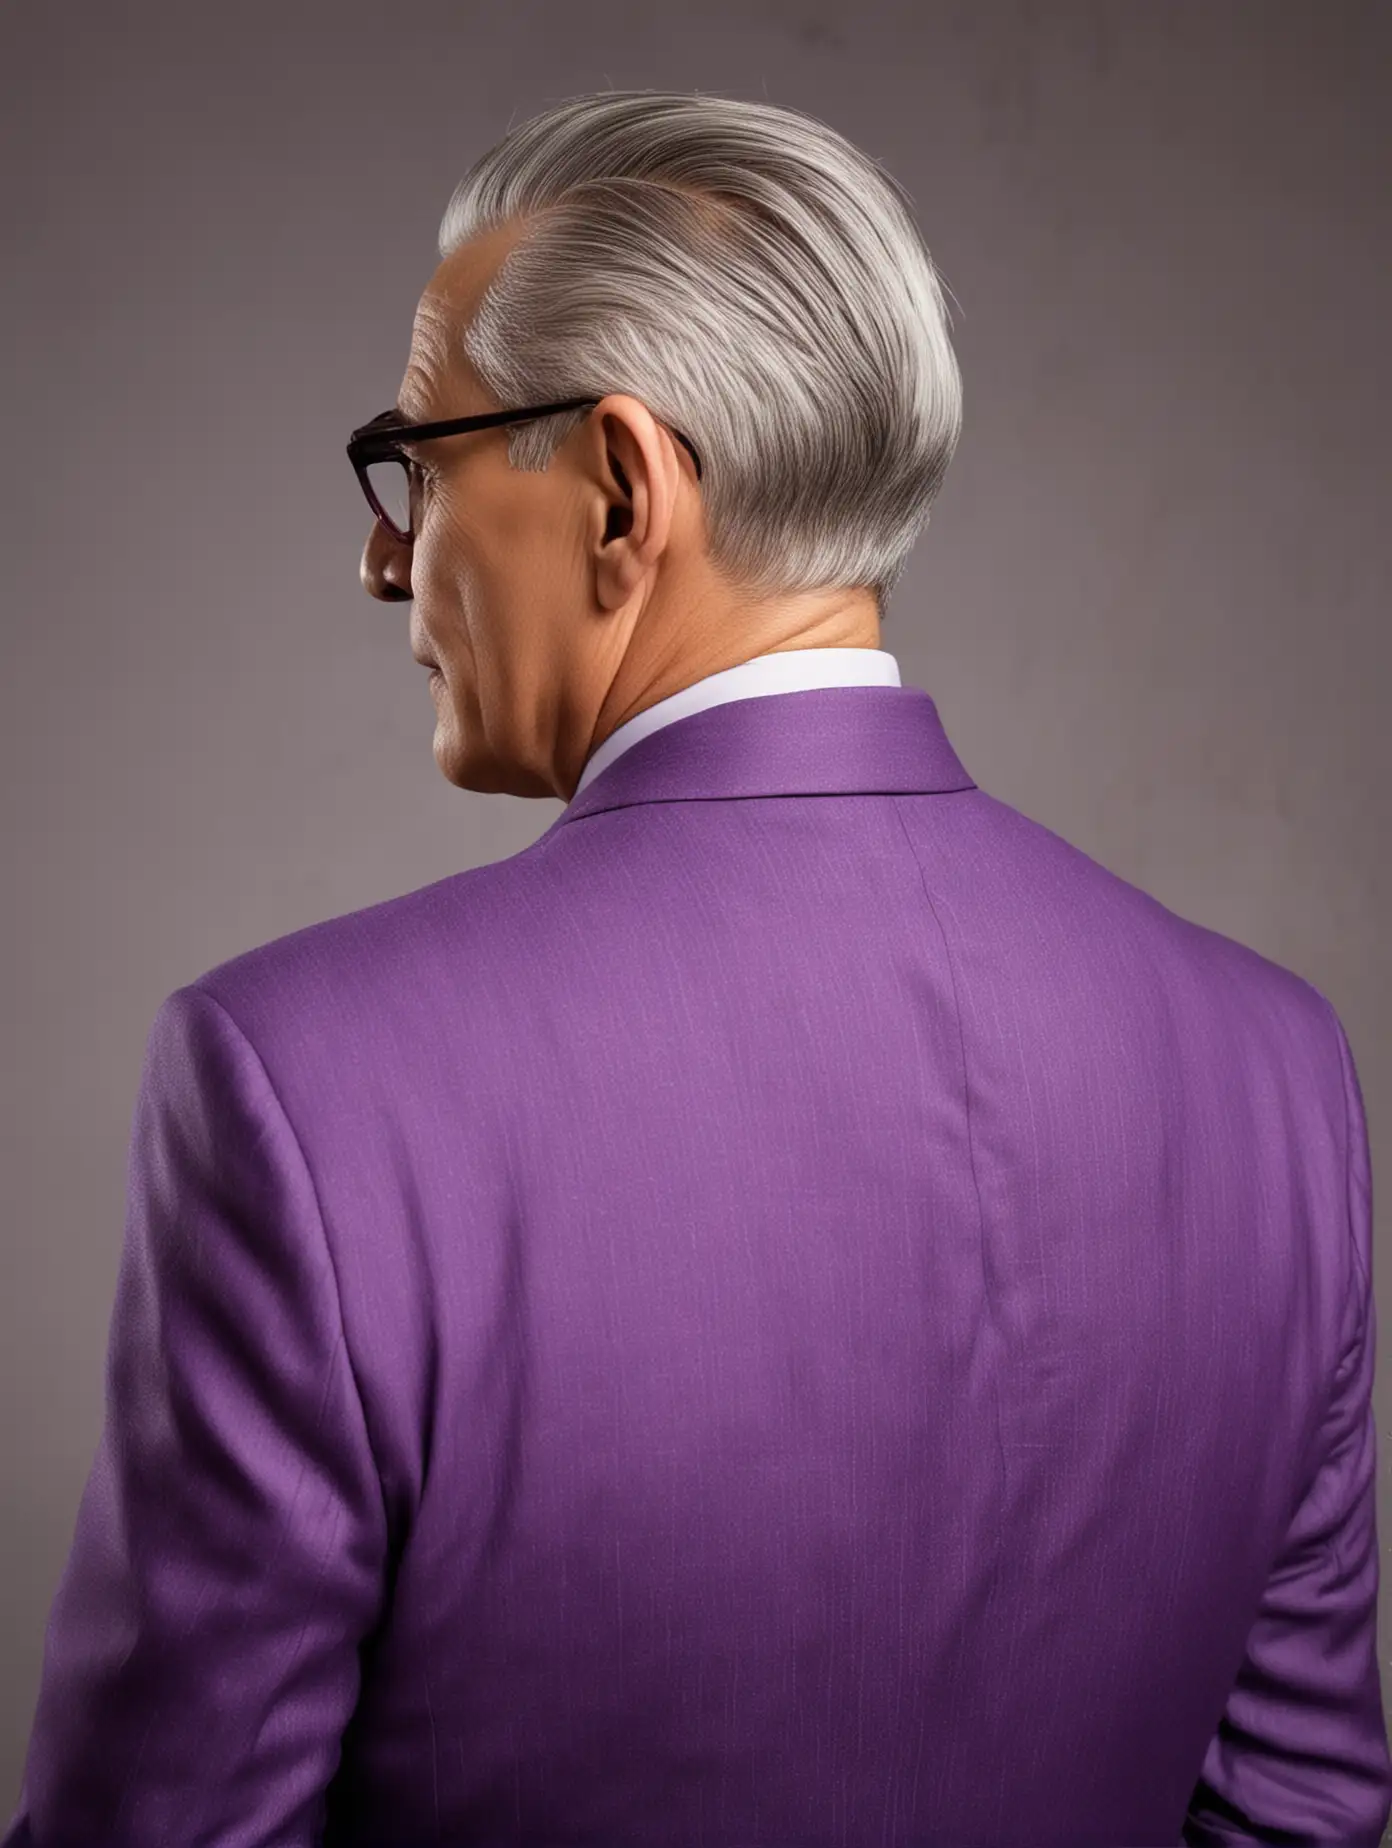 Elderly Man with Slicked Back Grey Hair and Glasses in 1920s Purple Suit